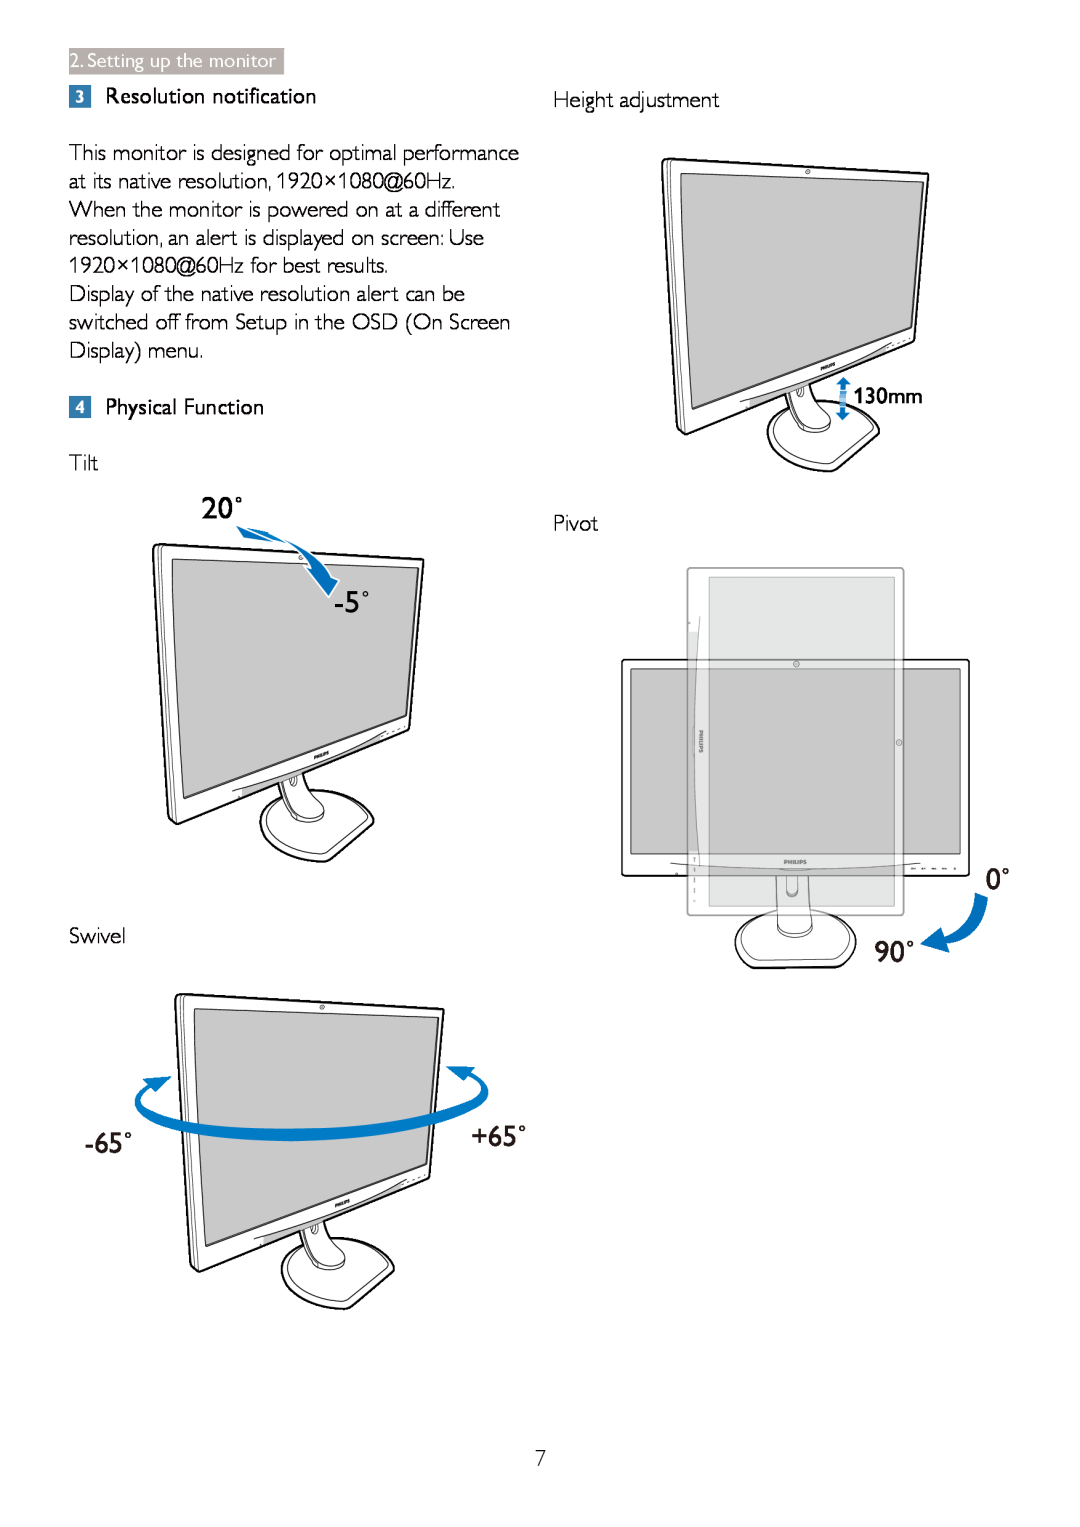 Philips 241P4LRY Resolution notification, Physical Function, Tilt, Pivot, Swivel, 65˚+65˚, Setting up the monitor 